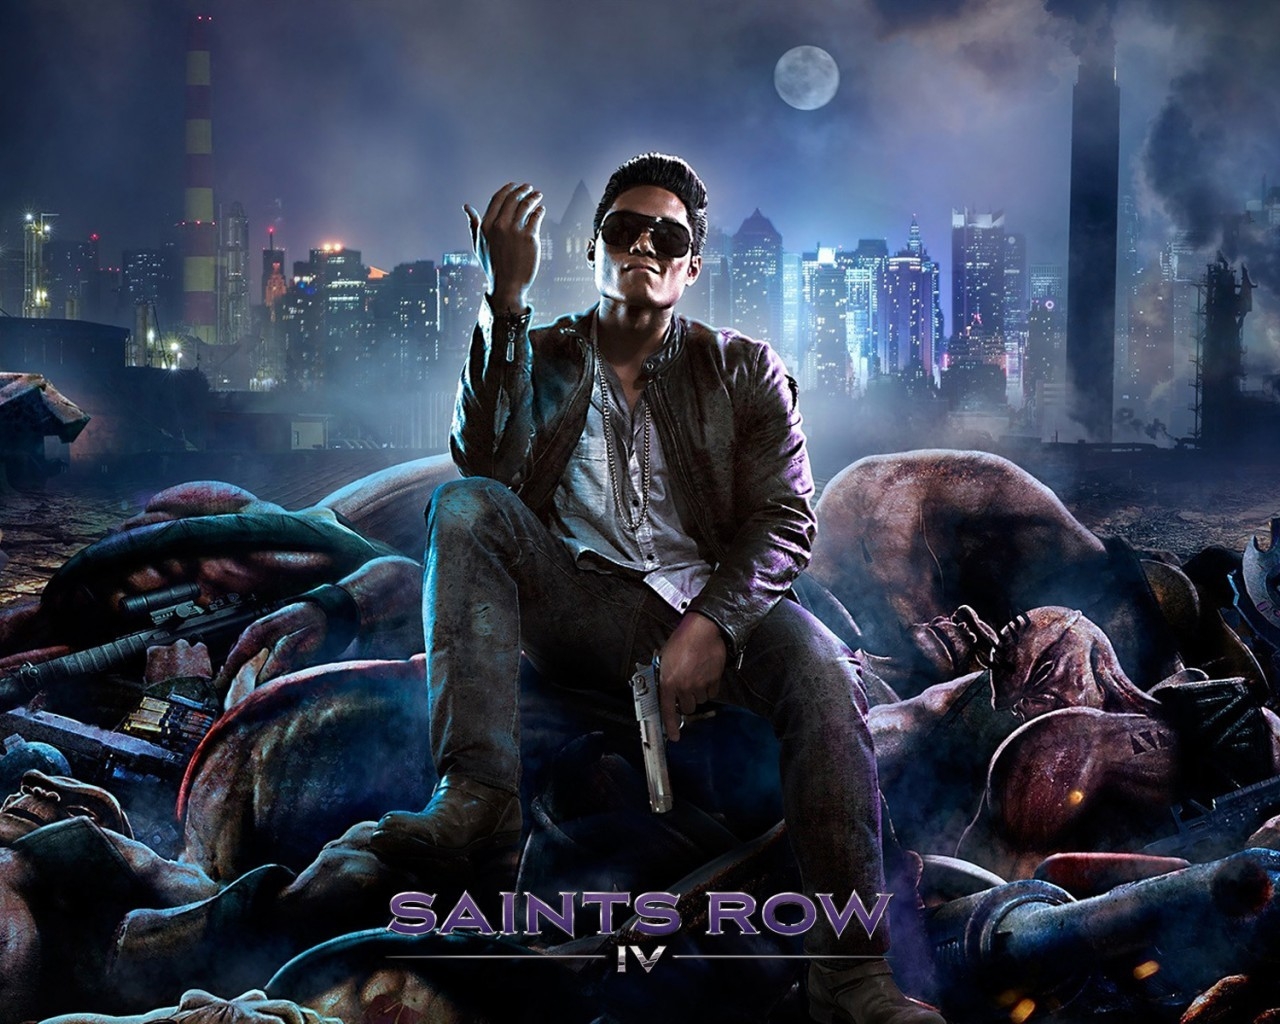 Saints Row 4 Poster for 1280 x 1024 resolution